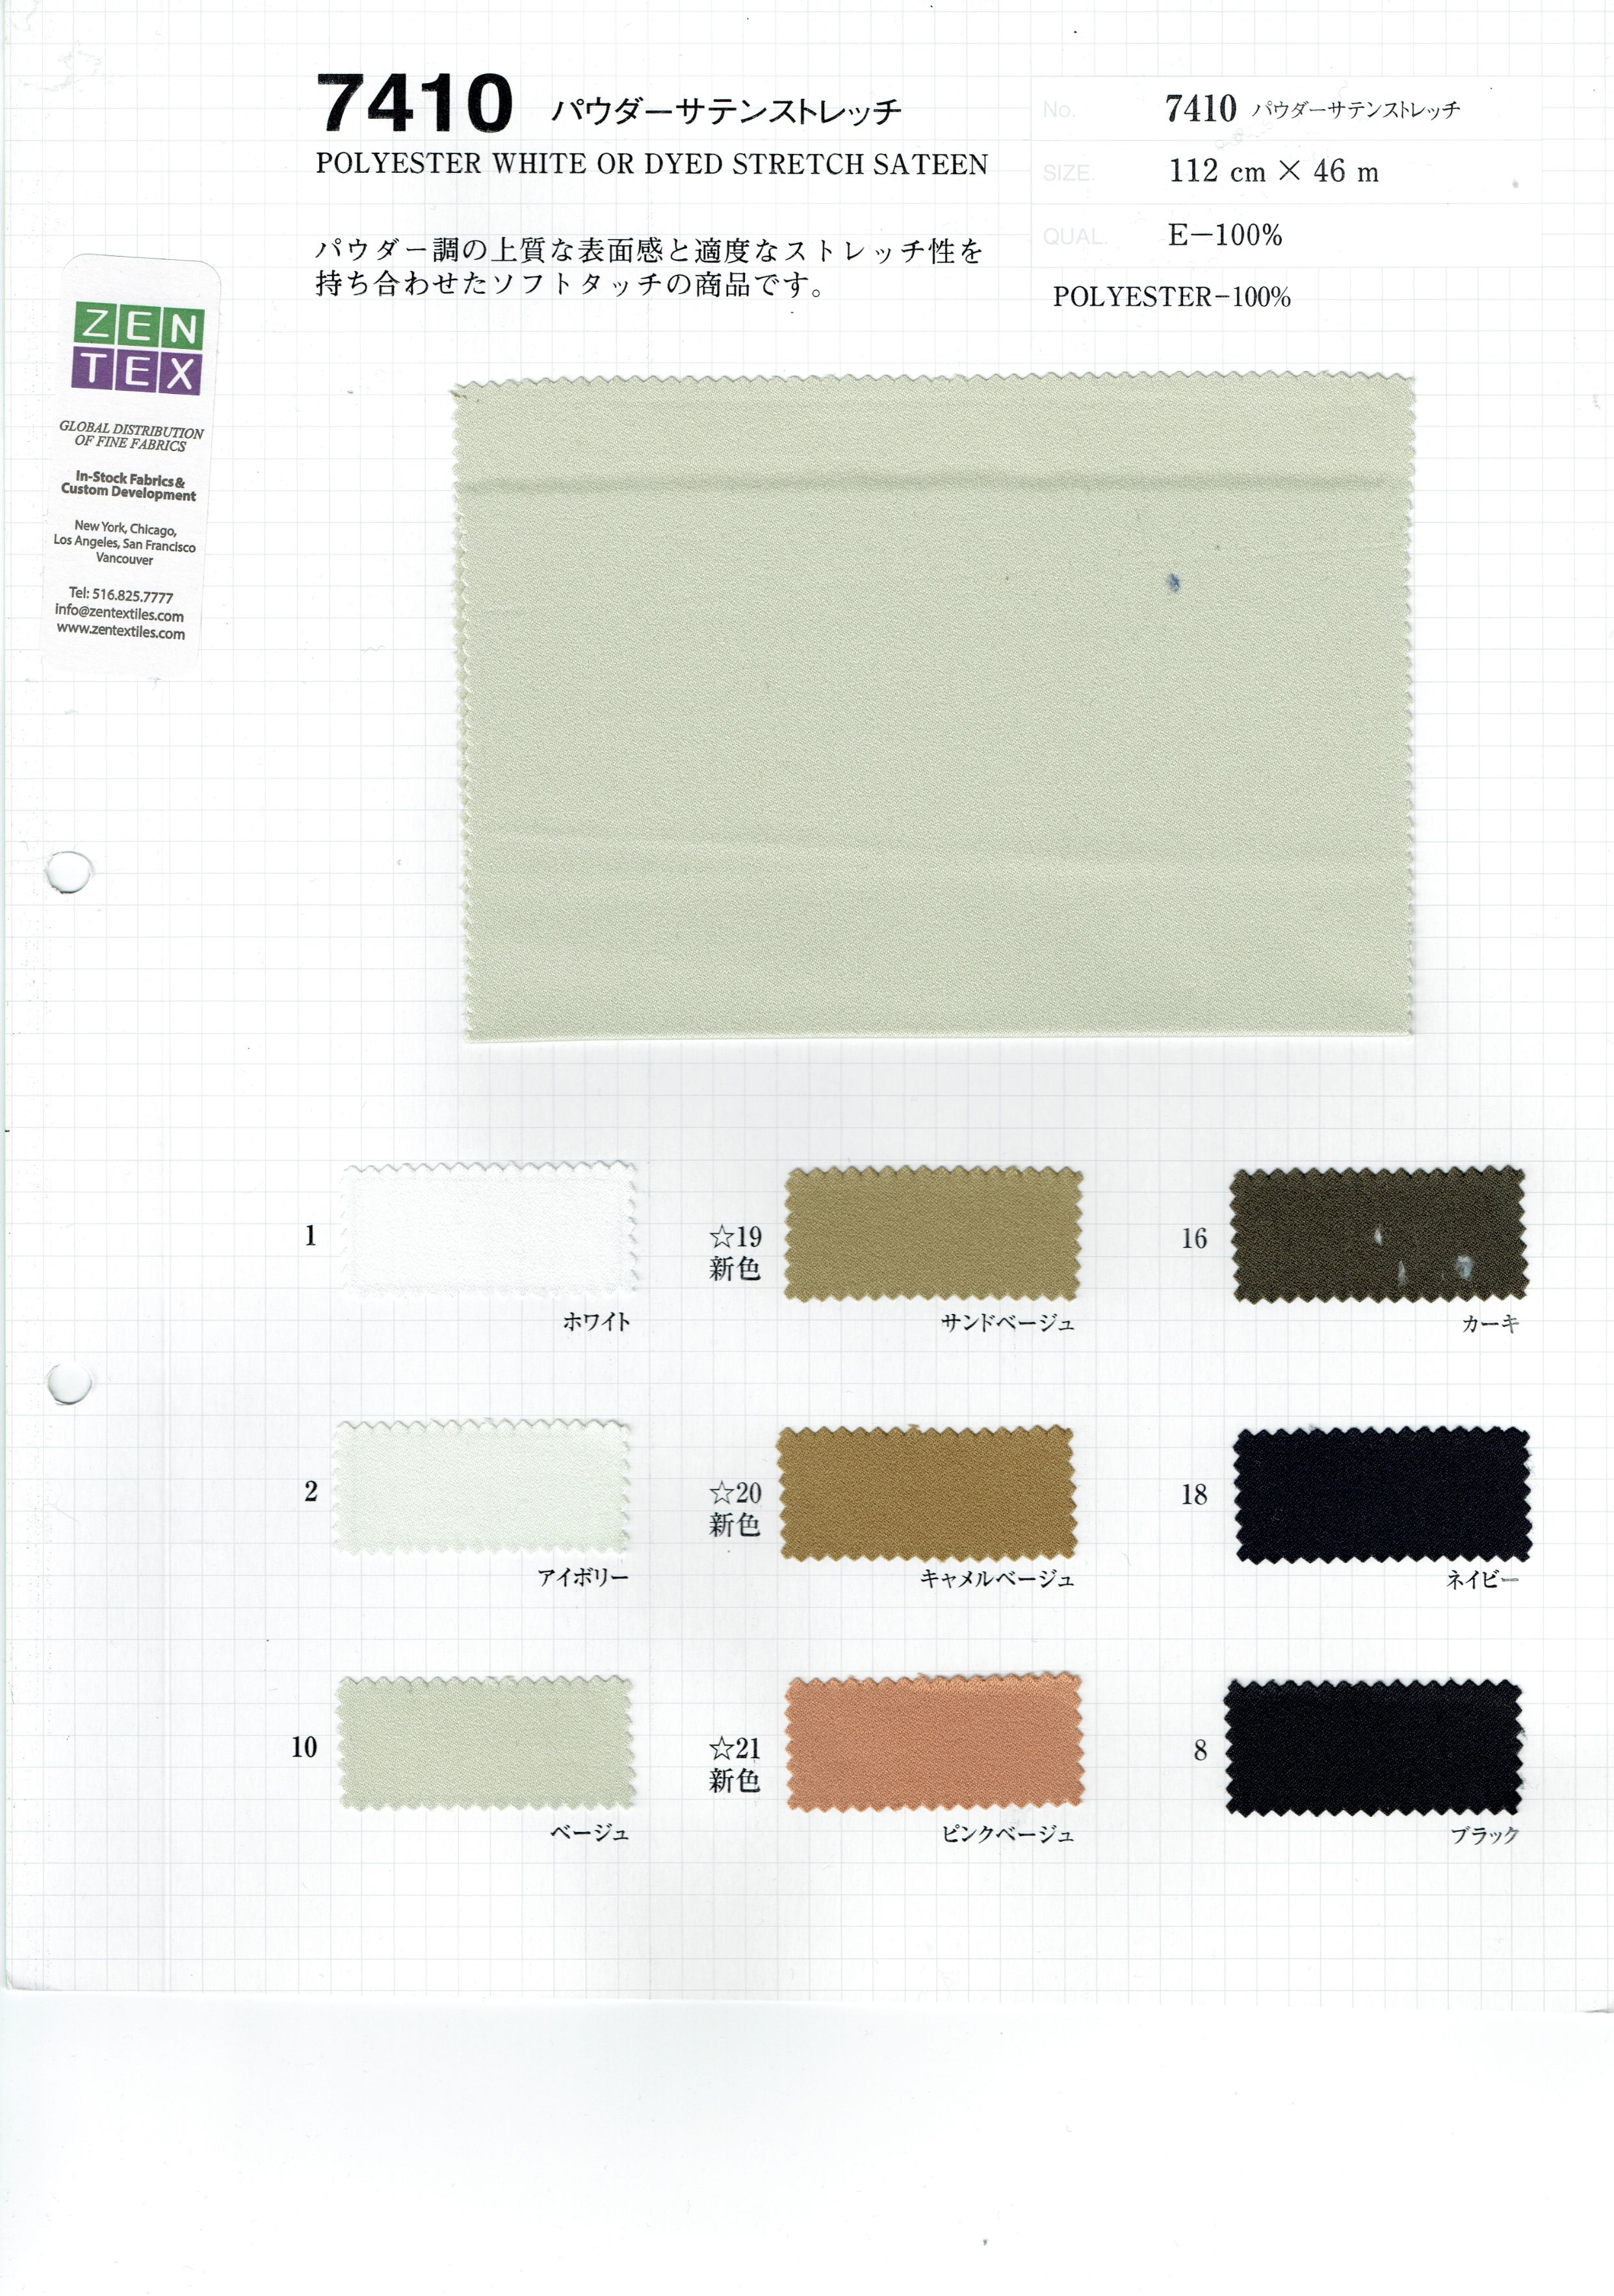 View 100% POLYESTER WHITE OR DYED STRETCH SATEEN